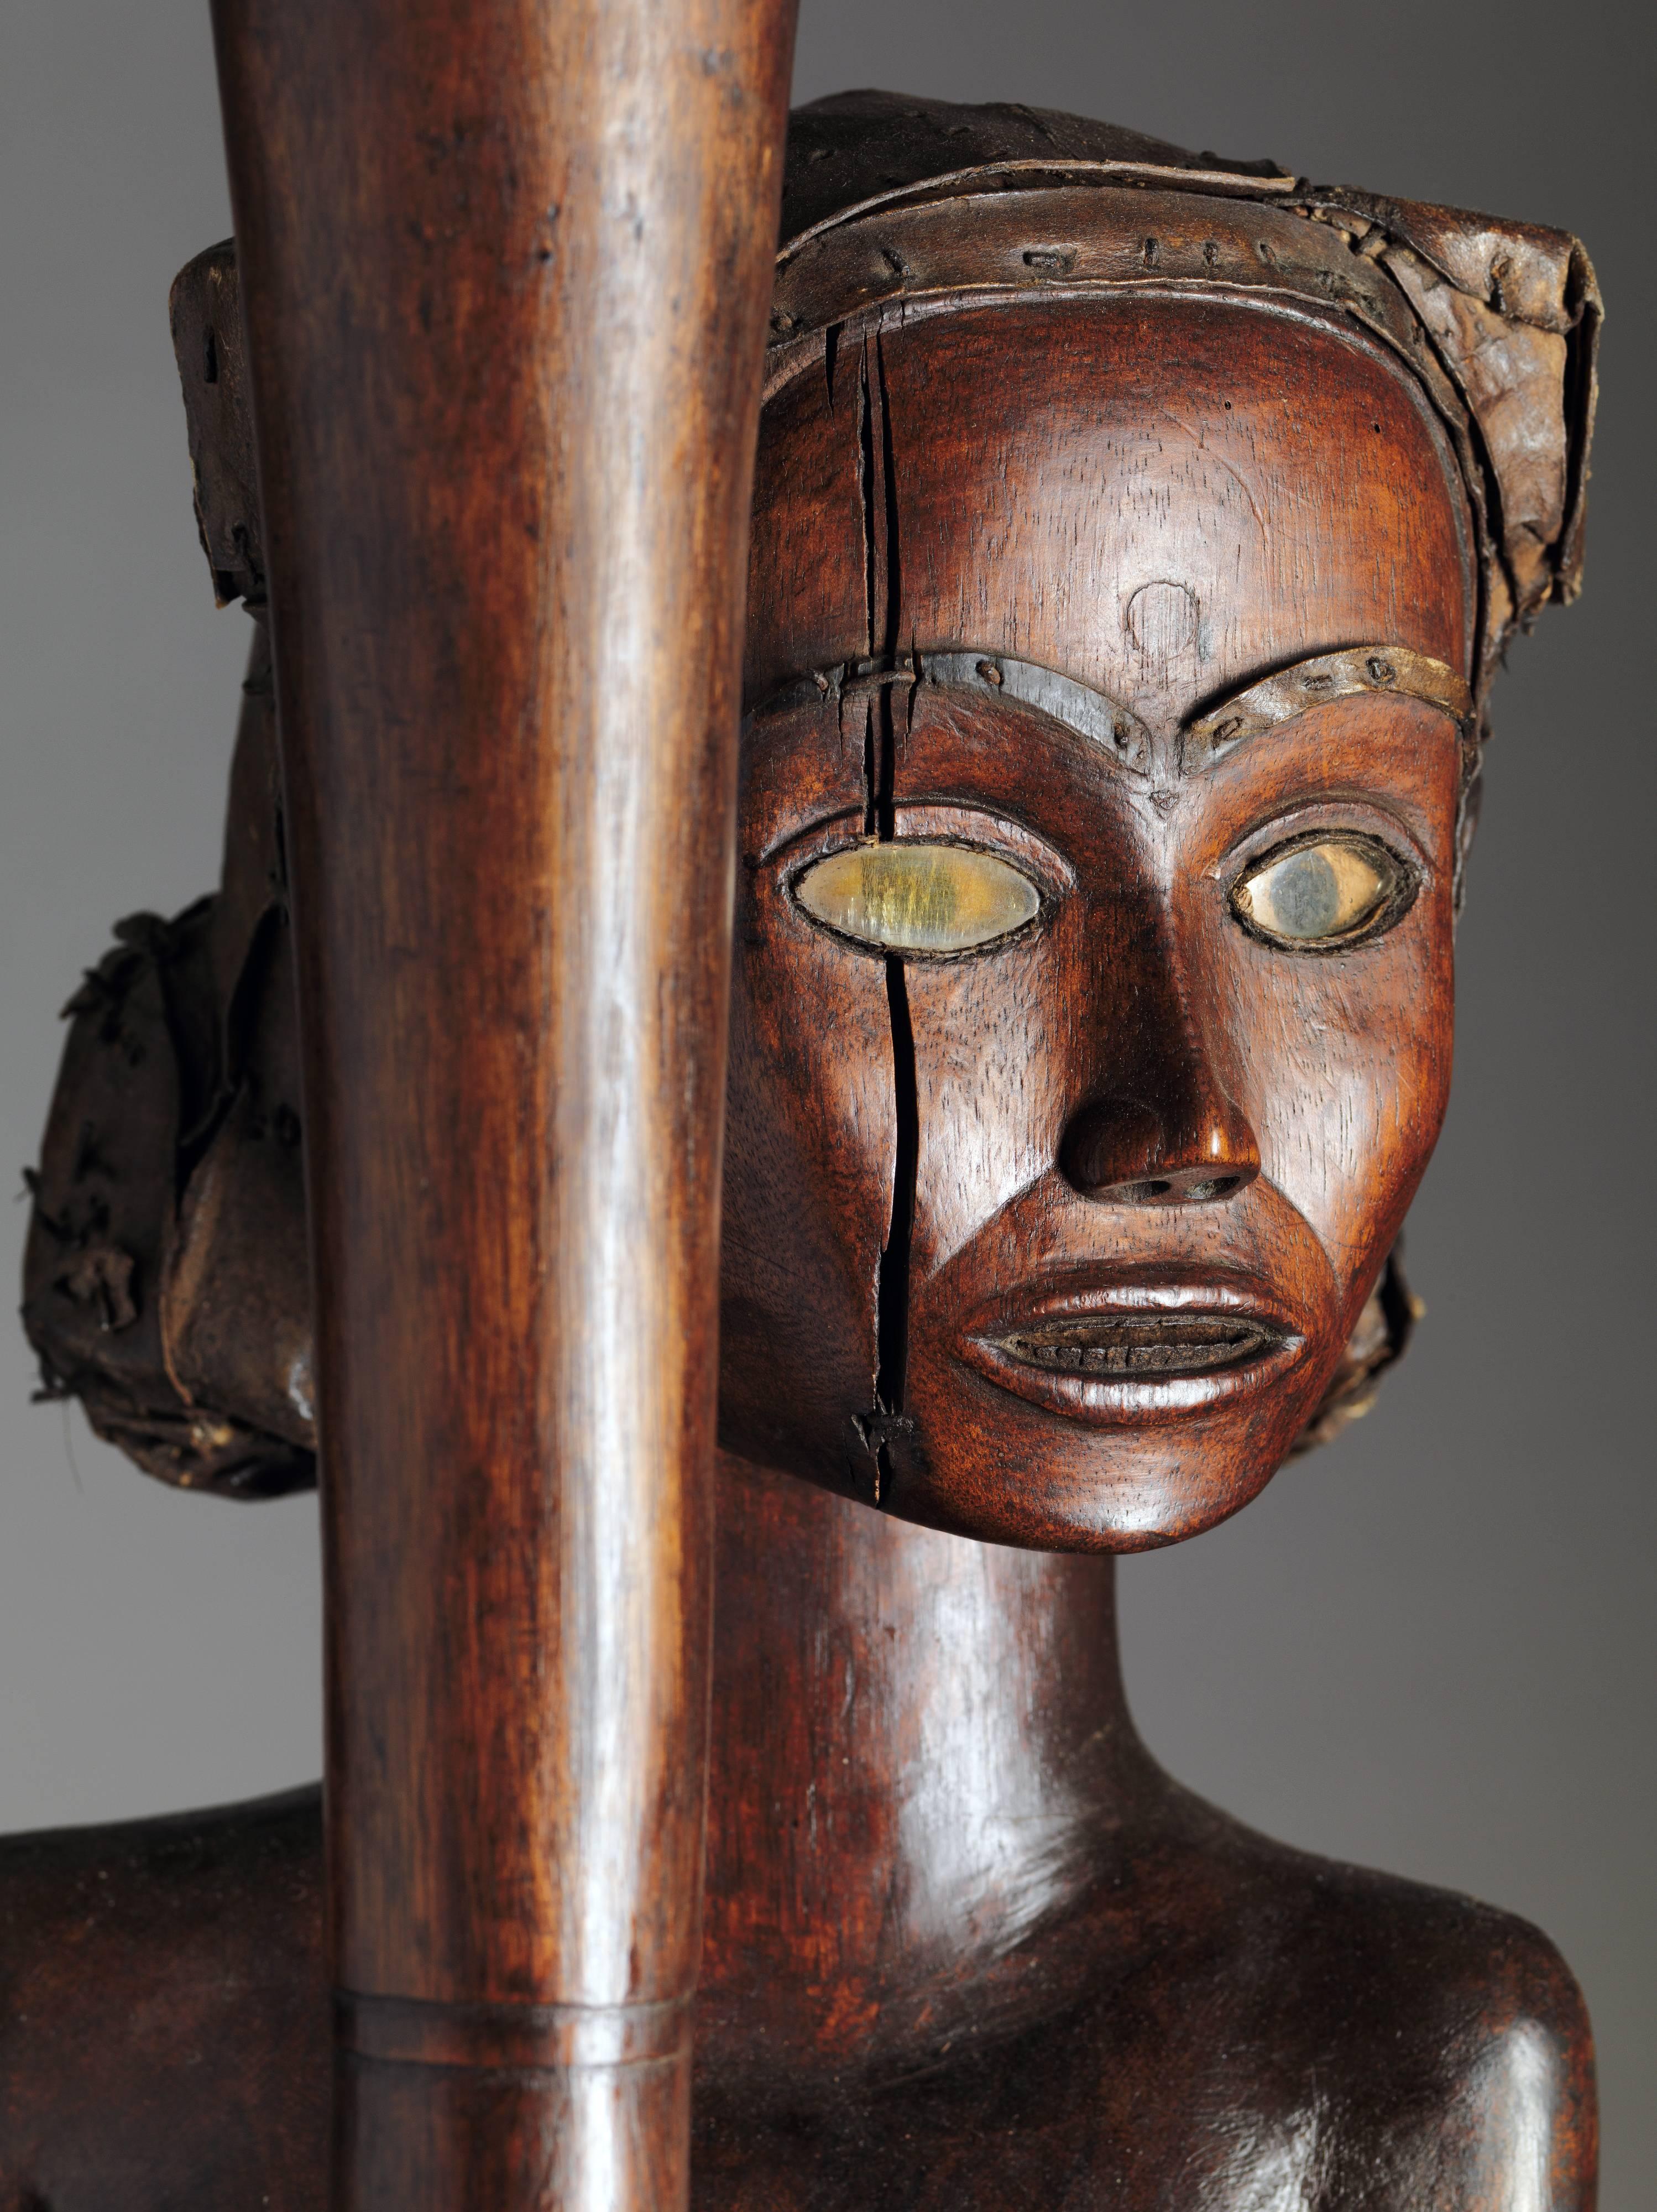 Cameroonian Mother and Child Sculpture, Cameroon, Mabea, 1920-1930, Provenance Ratton